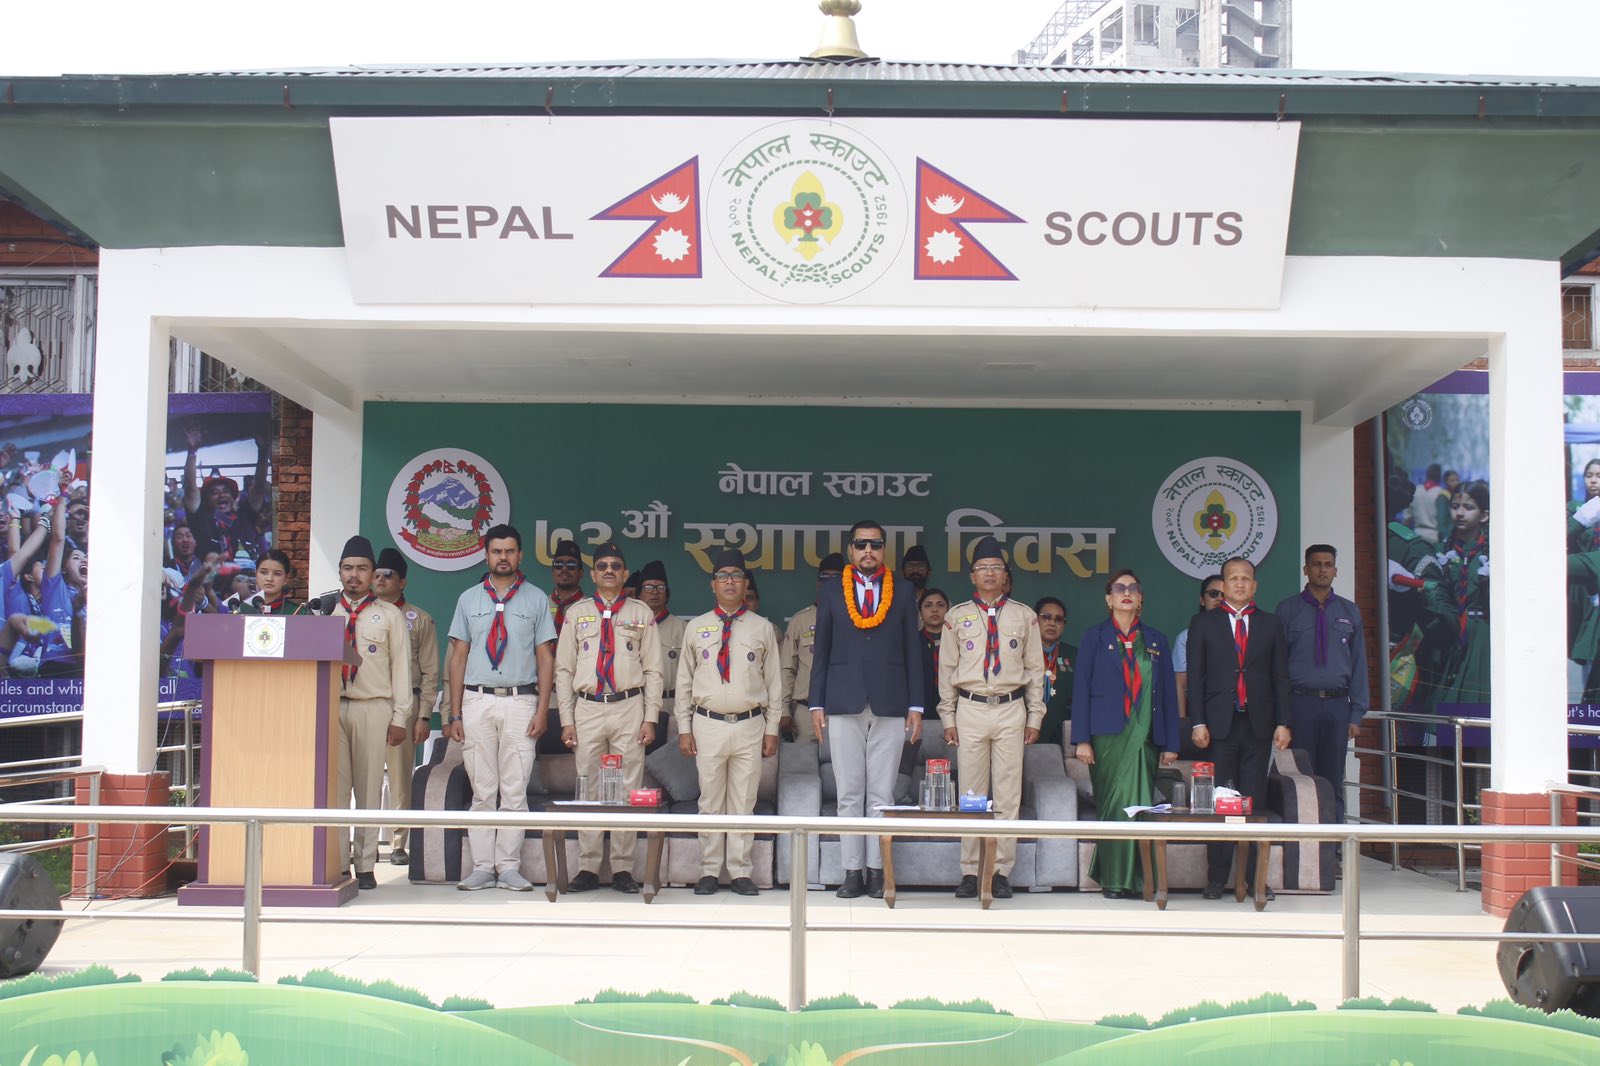 73rd Nepal Scout Foundation Day celebrated In Pictures - Travel News, Insights & Resources.